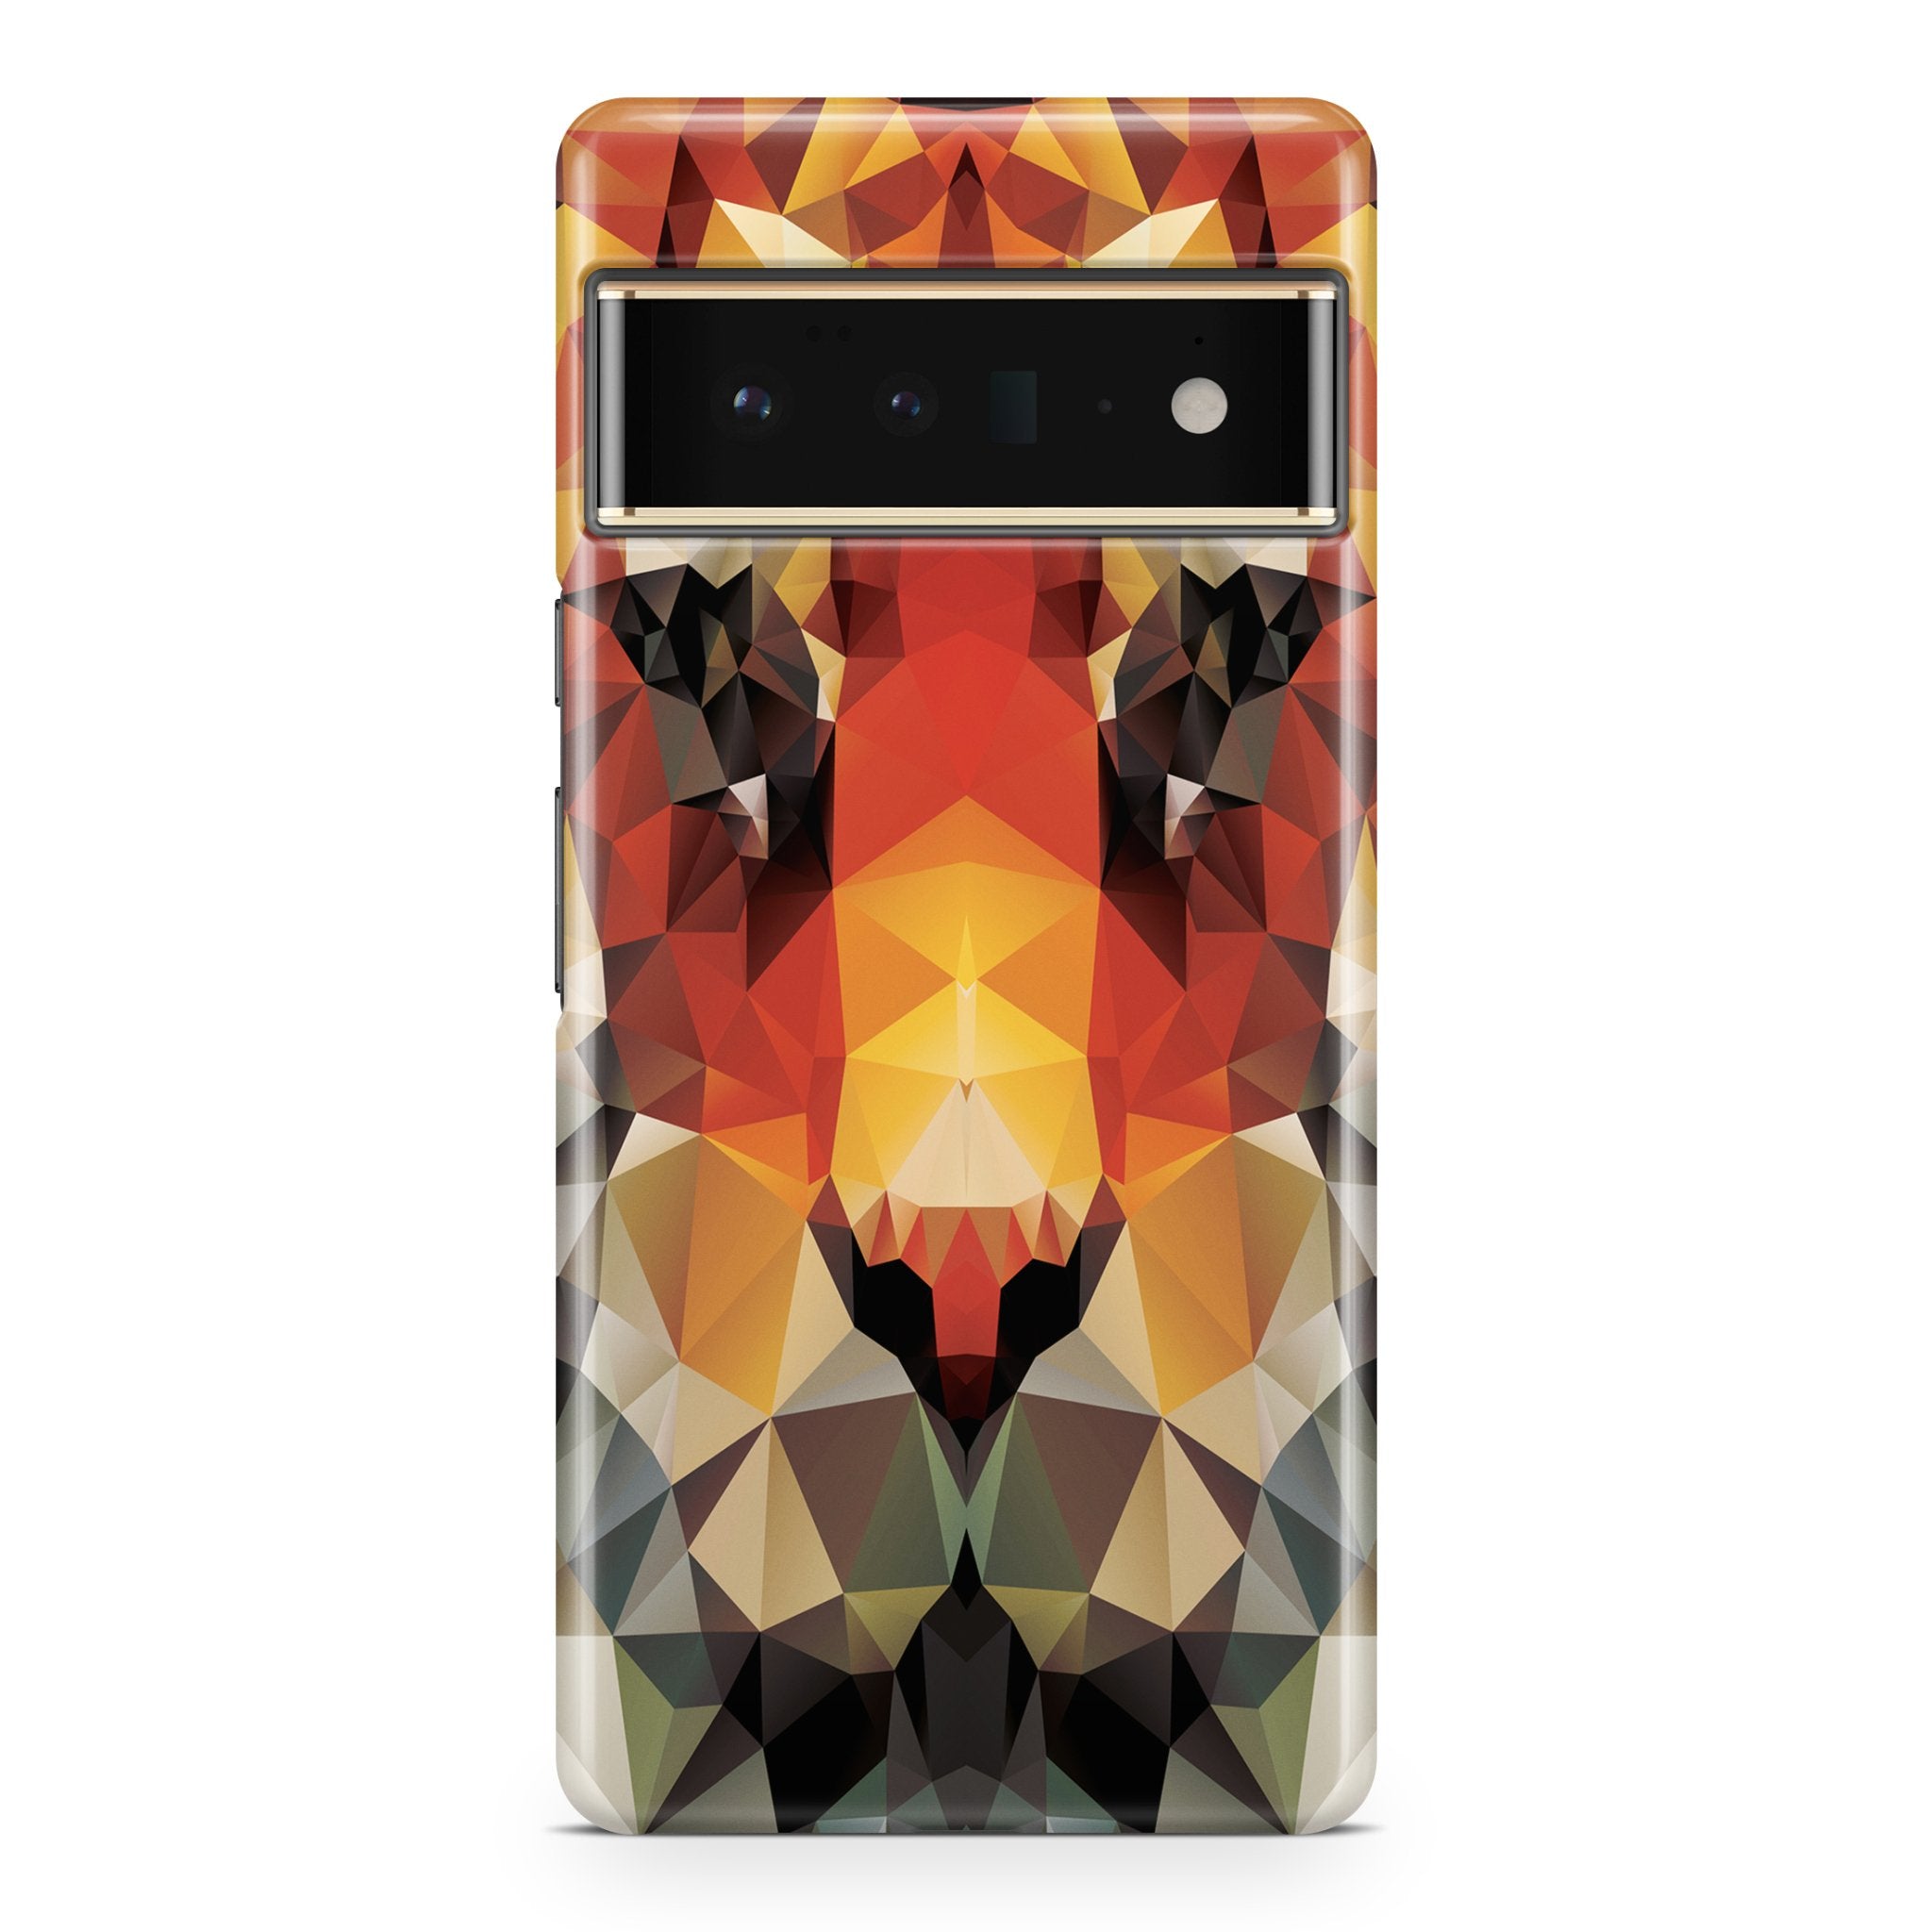 Polygonal Tiger - Google phone case designs by CaseSwagger